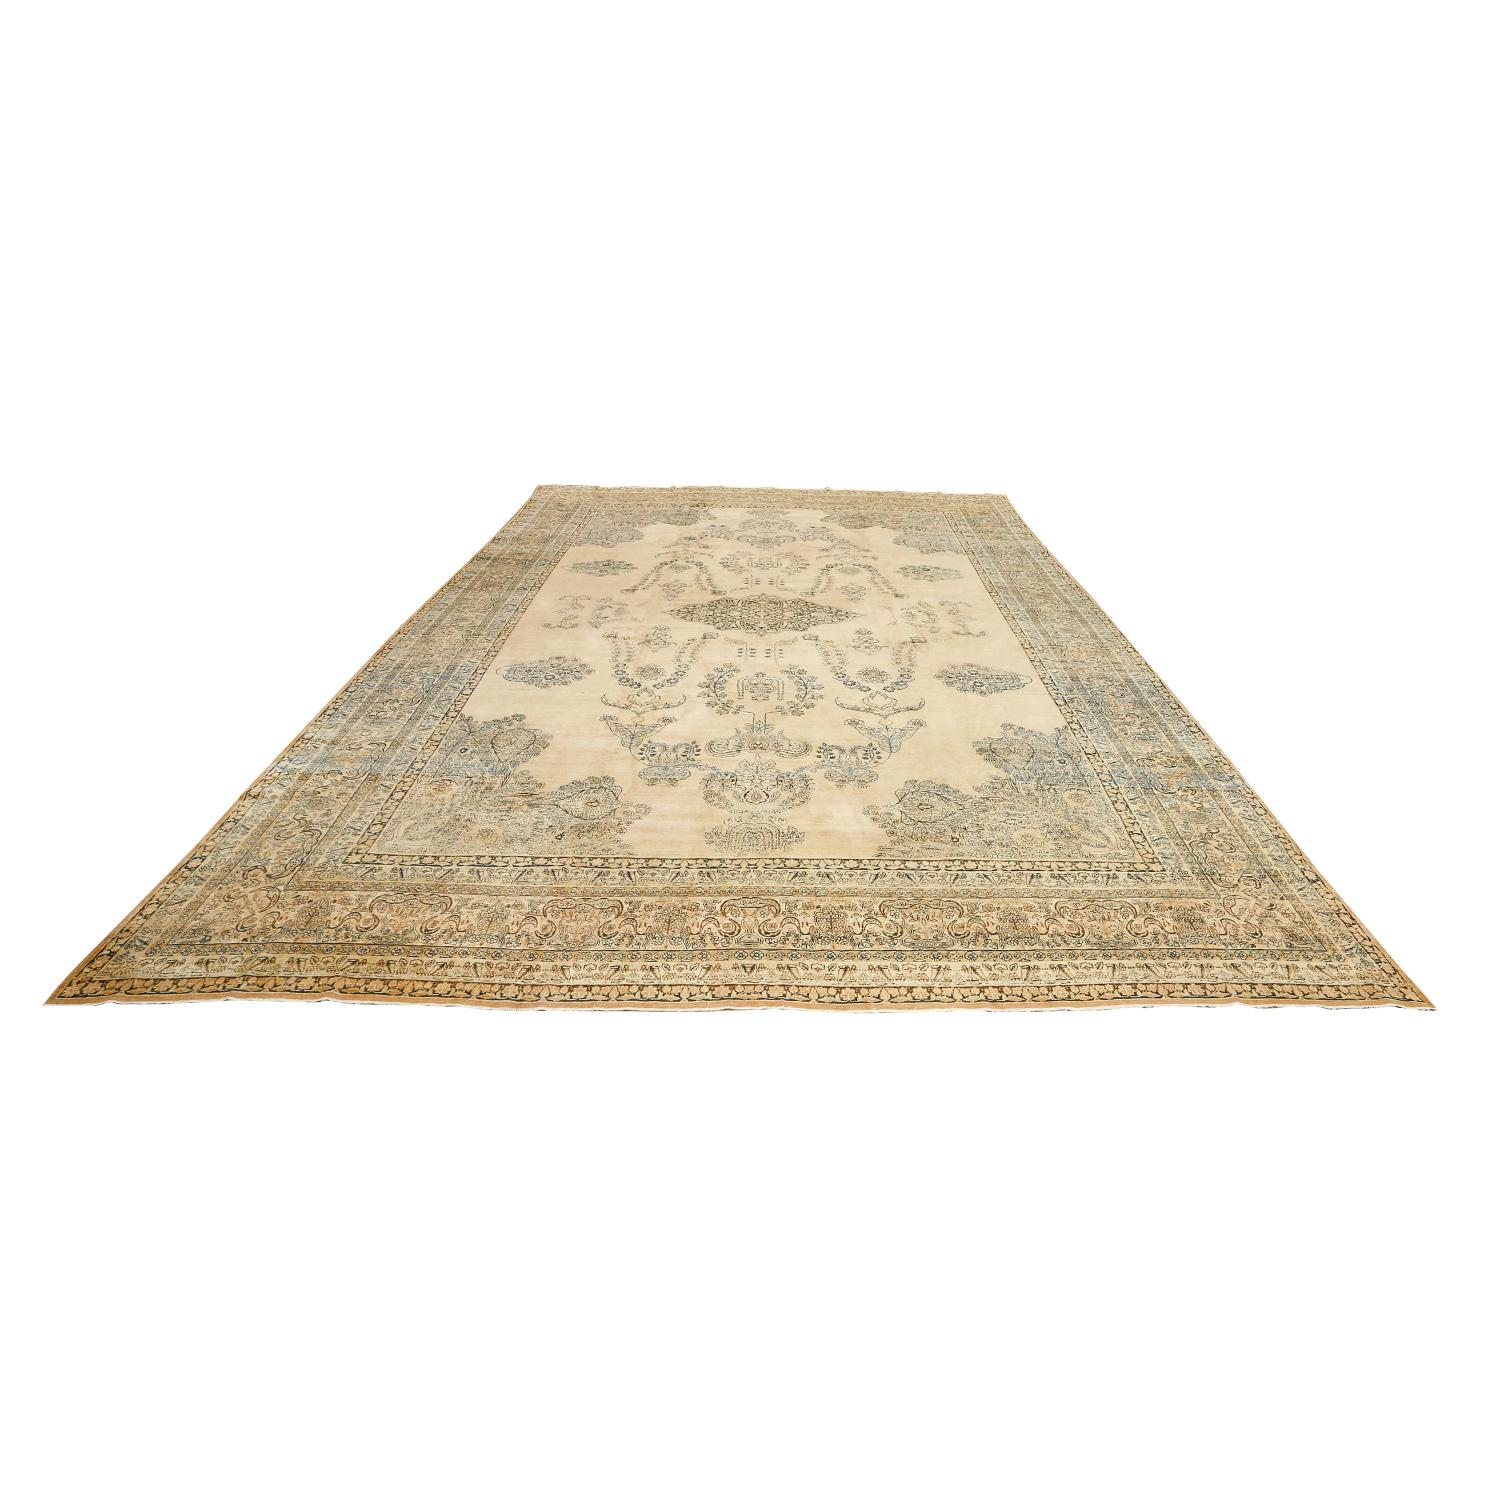 This Antique Lavar Rug featuring a Center Medallion is a captivating symbol of enduring beauty and meticulous craftsmanship. Hailing from the esteemed weaving region of Lavar in Persia, these rugs are cherished for their exquisite designs that often